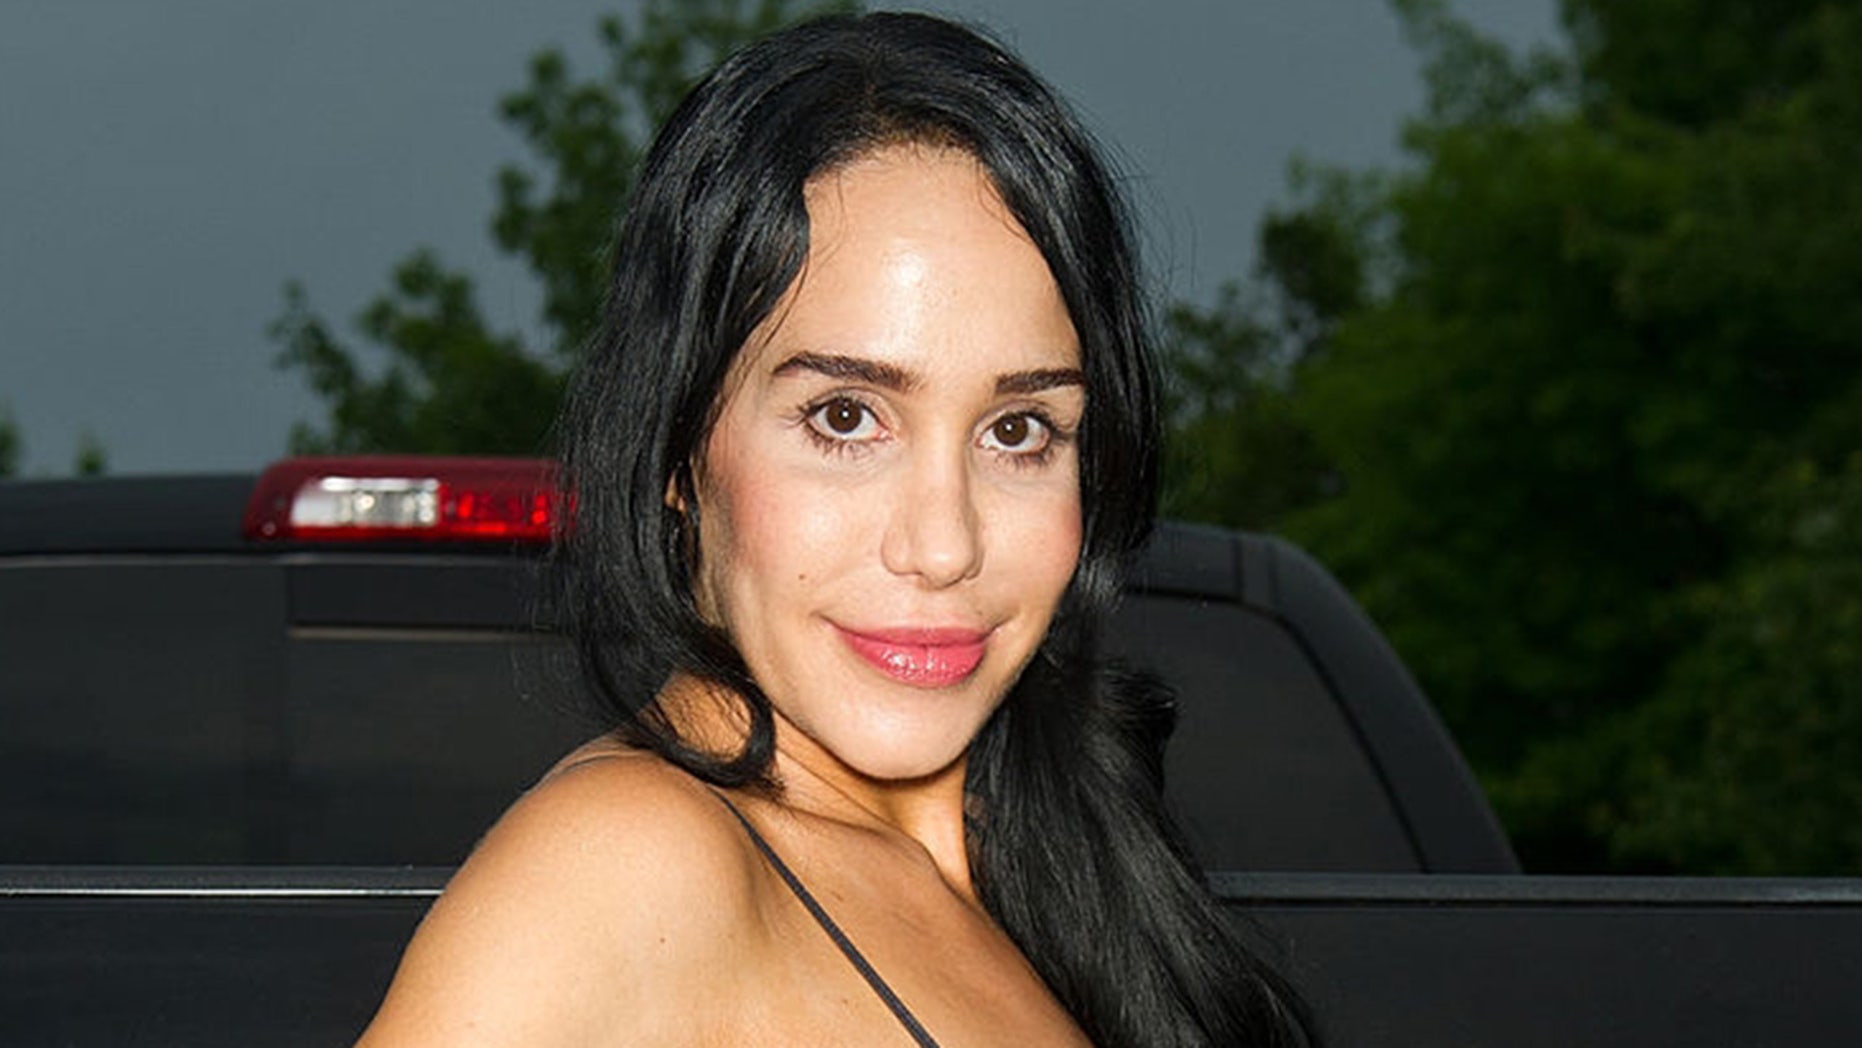 Babies In Porn - Octomom Nadya Suleman opens up about her porn past: 'I hit ...